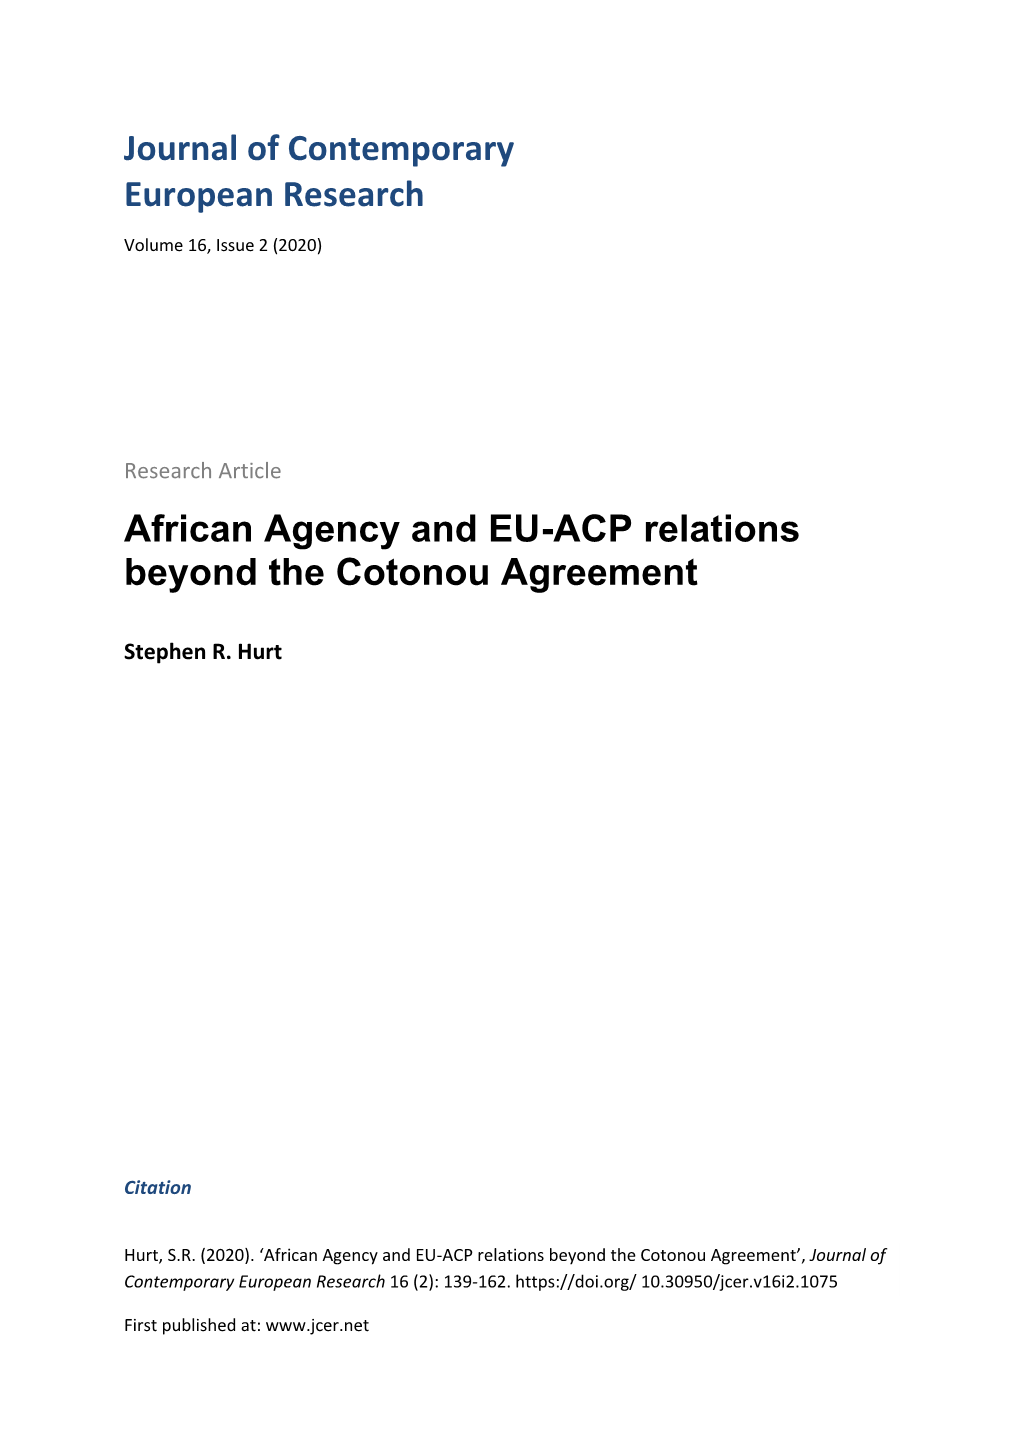 Journal of Contemporary European Research African Agency and EU